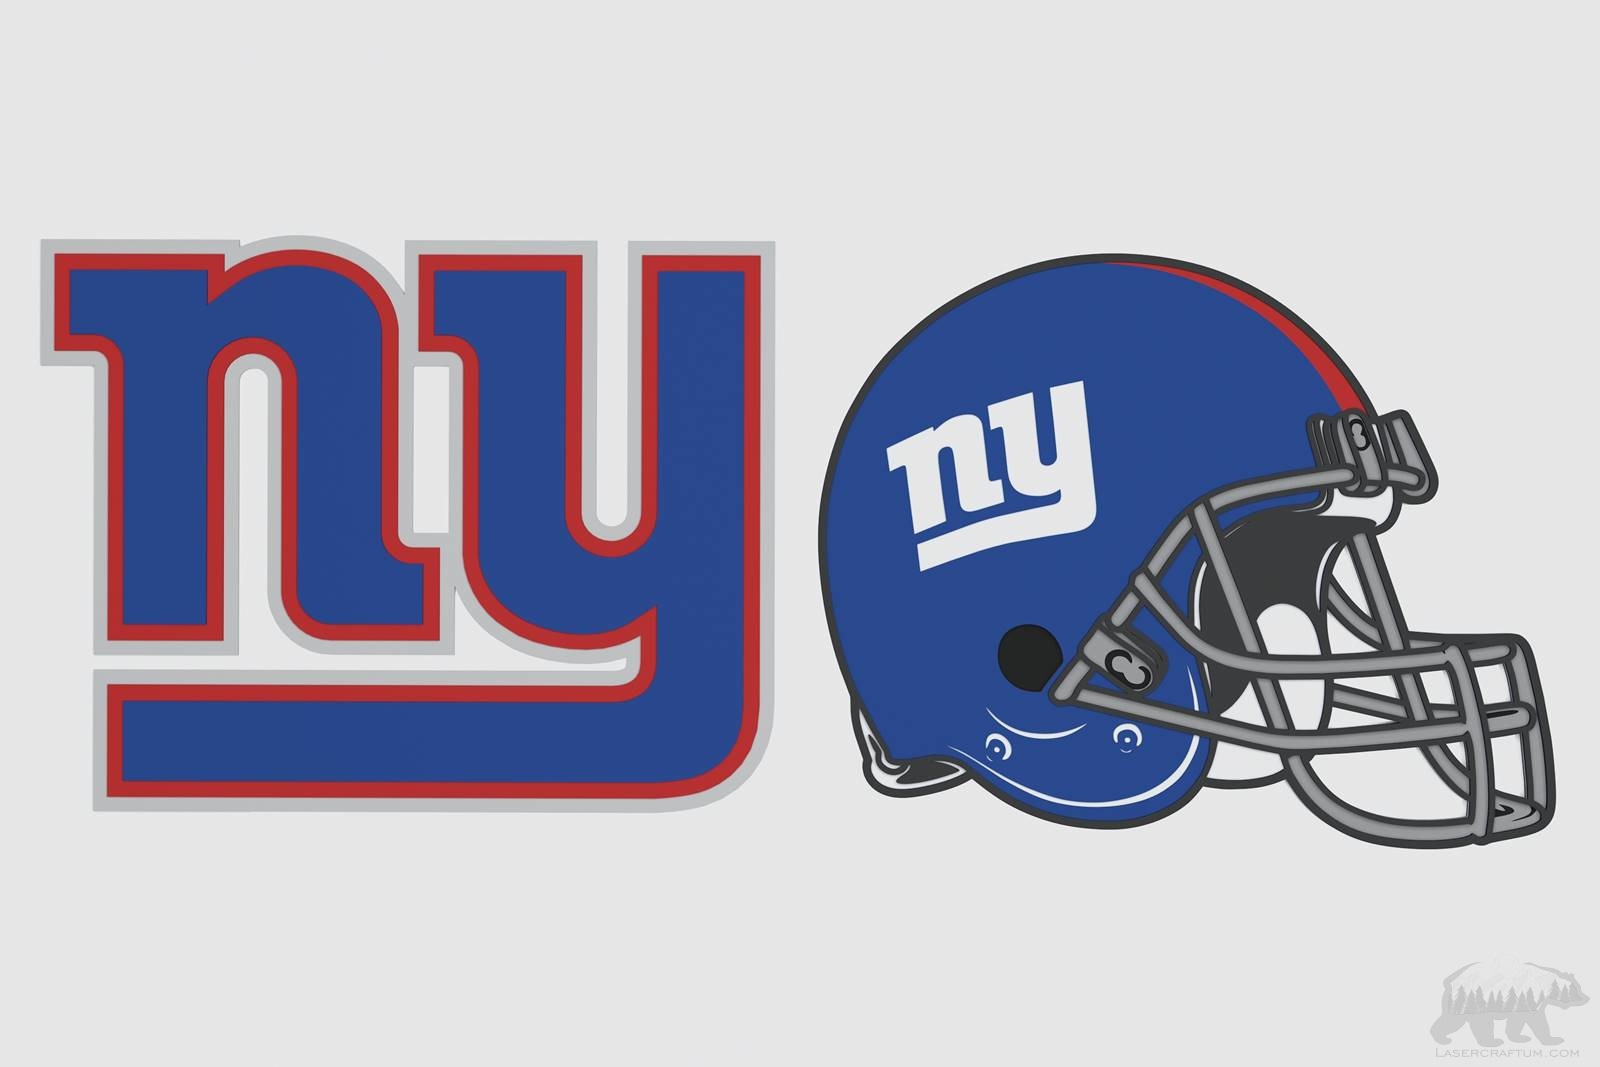 New York Giants Layered Design for cutting